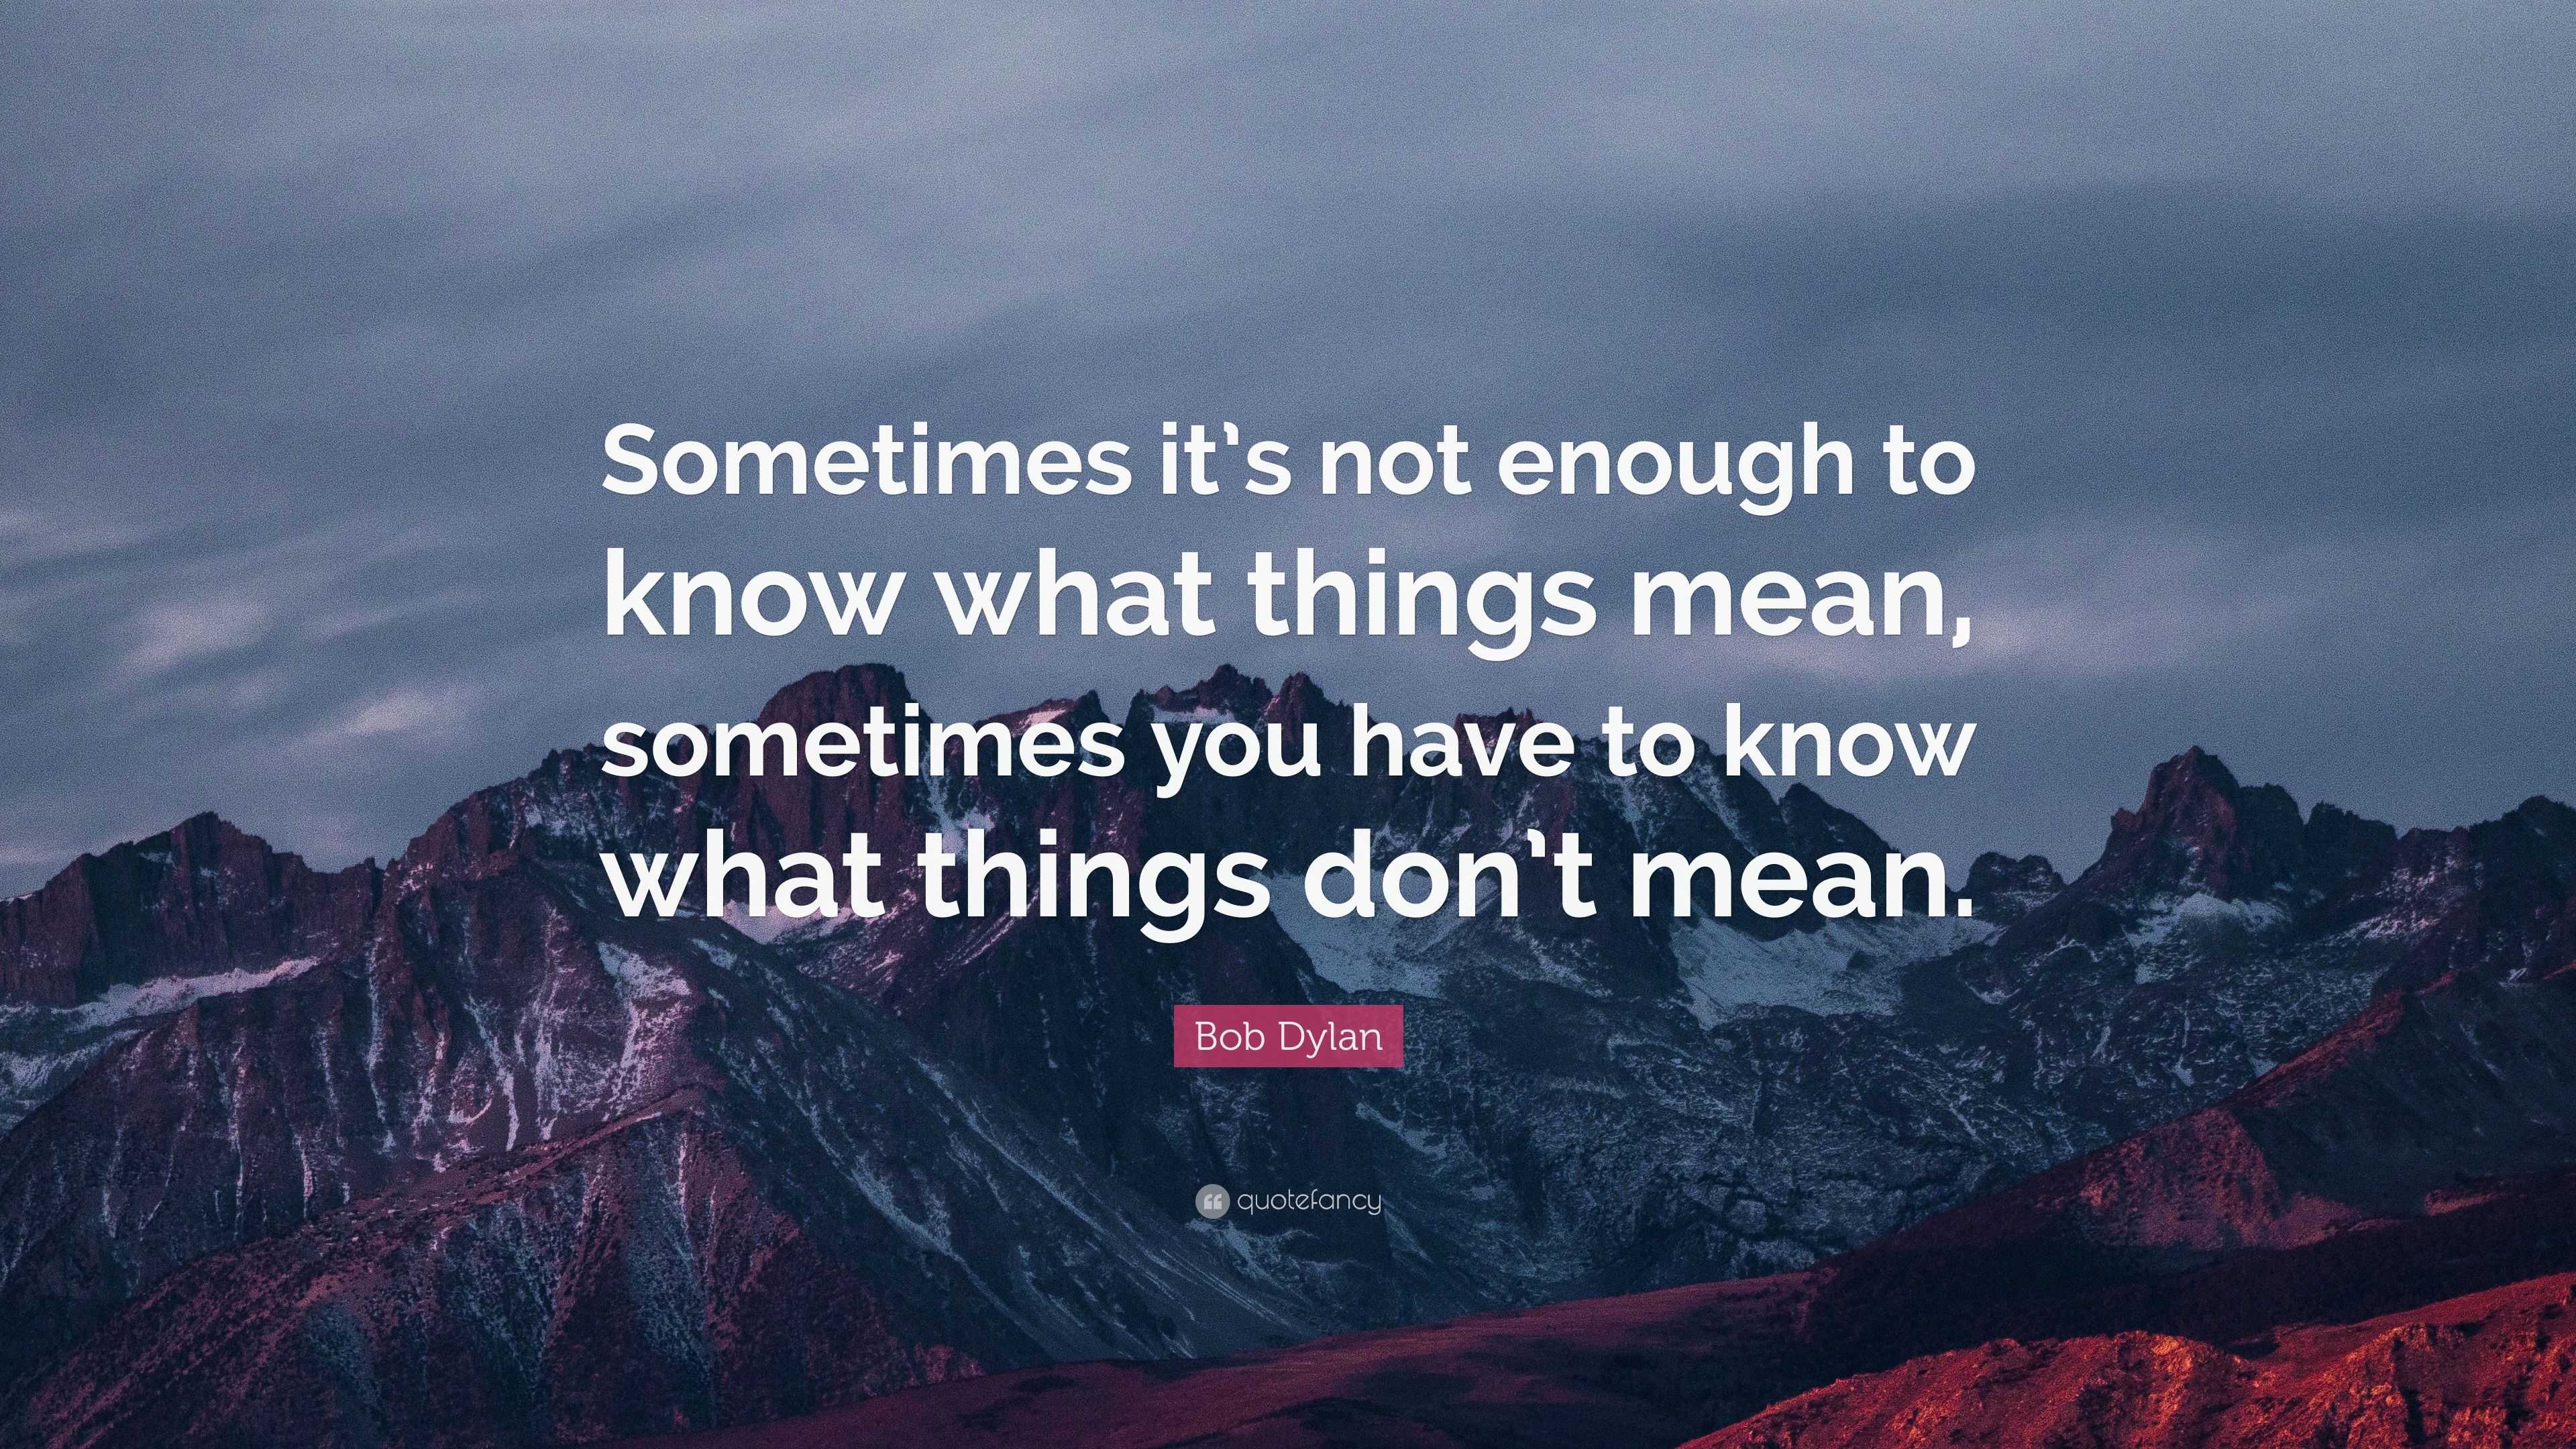 Bob Dylan Quote: “Sometimes it’s not enough to know what things mean ...